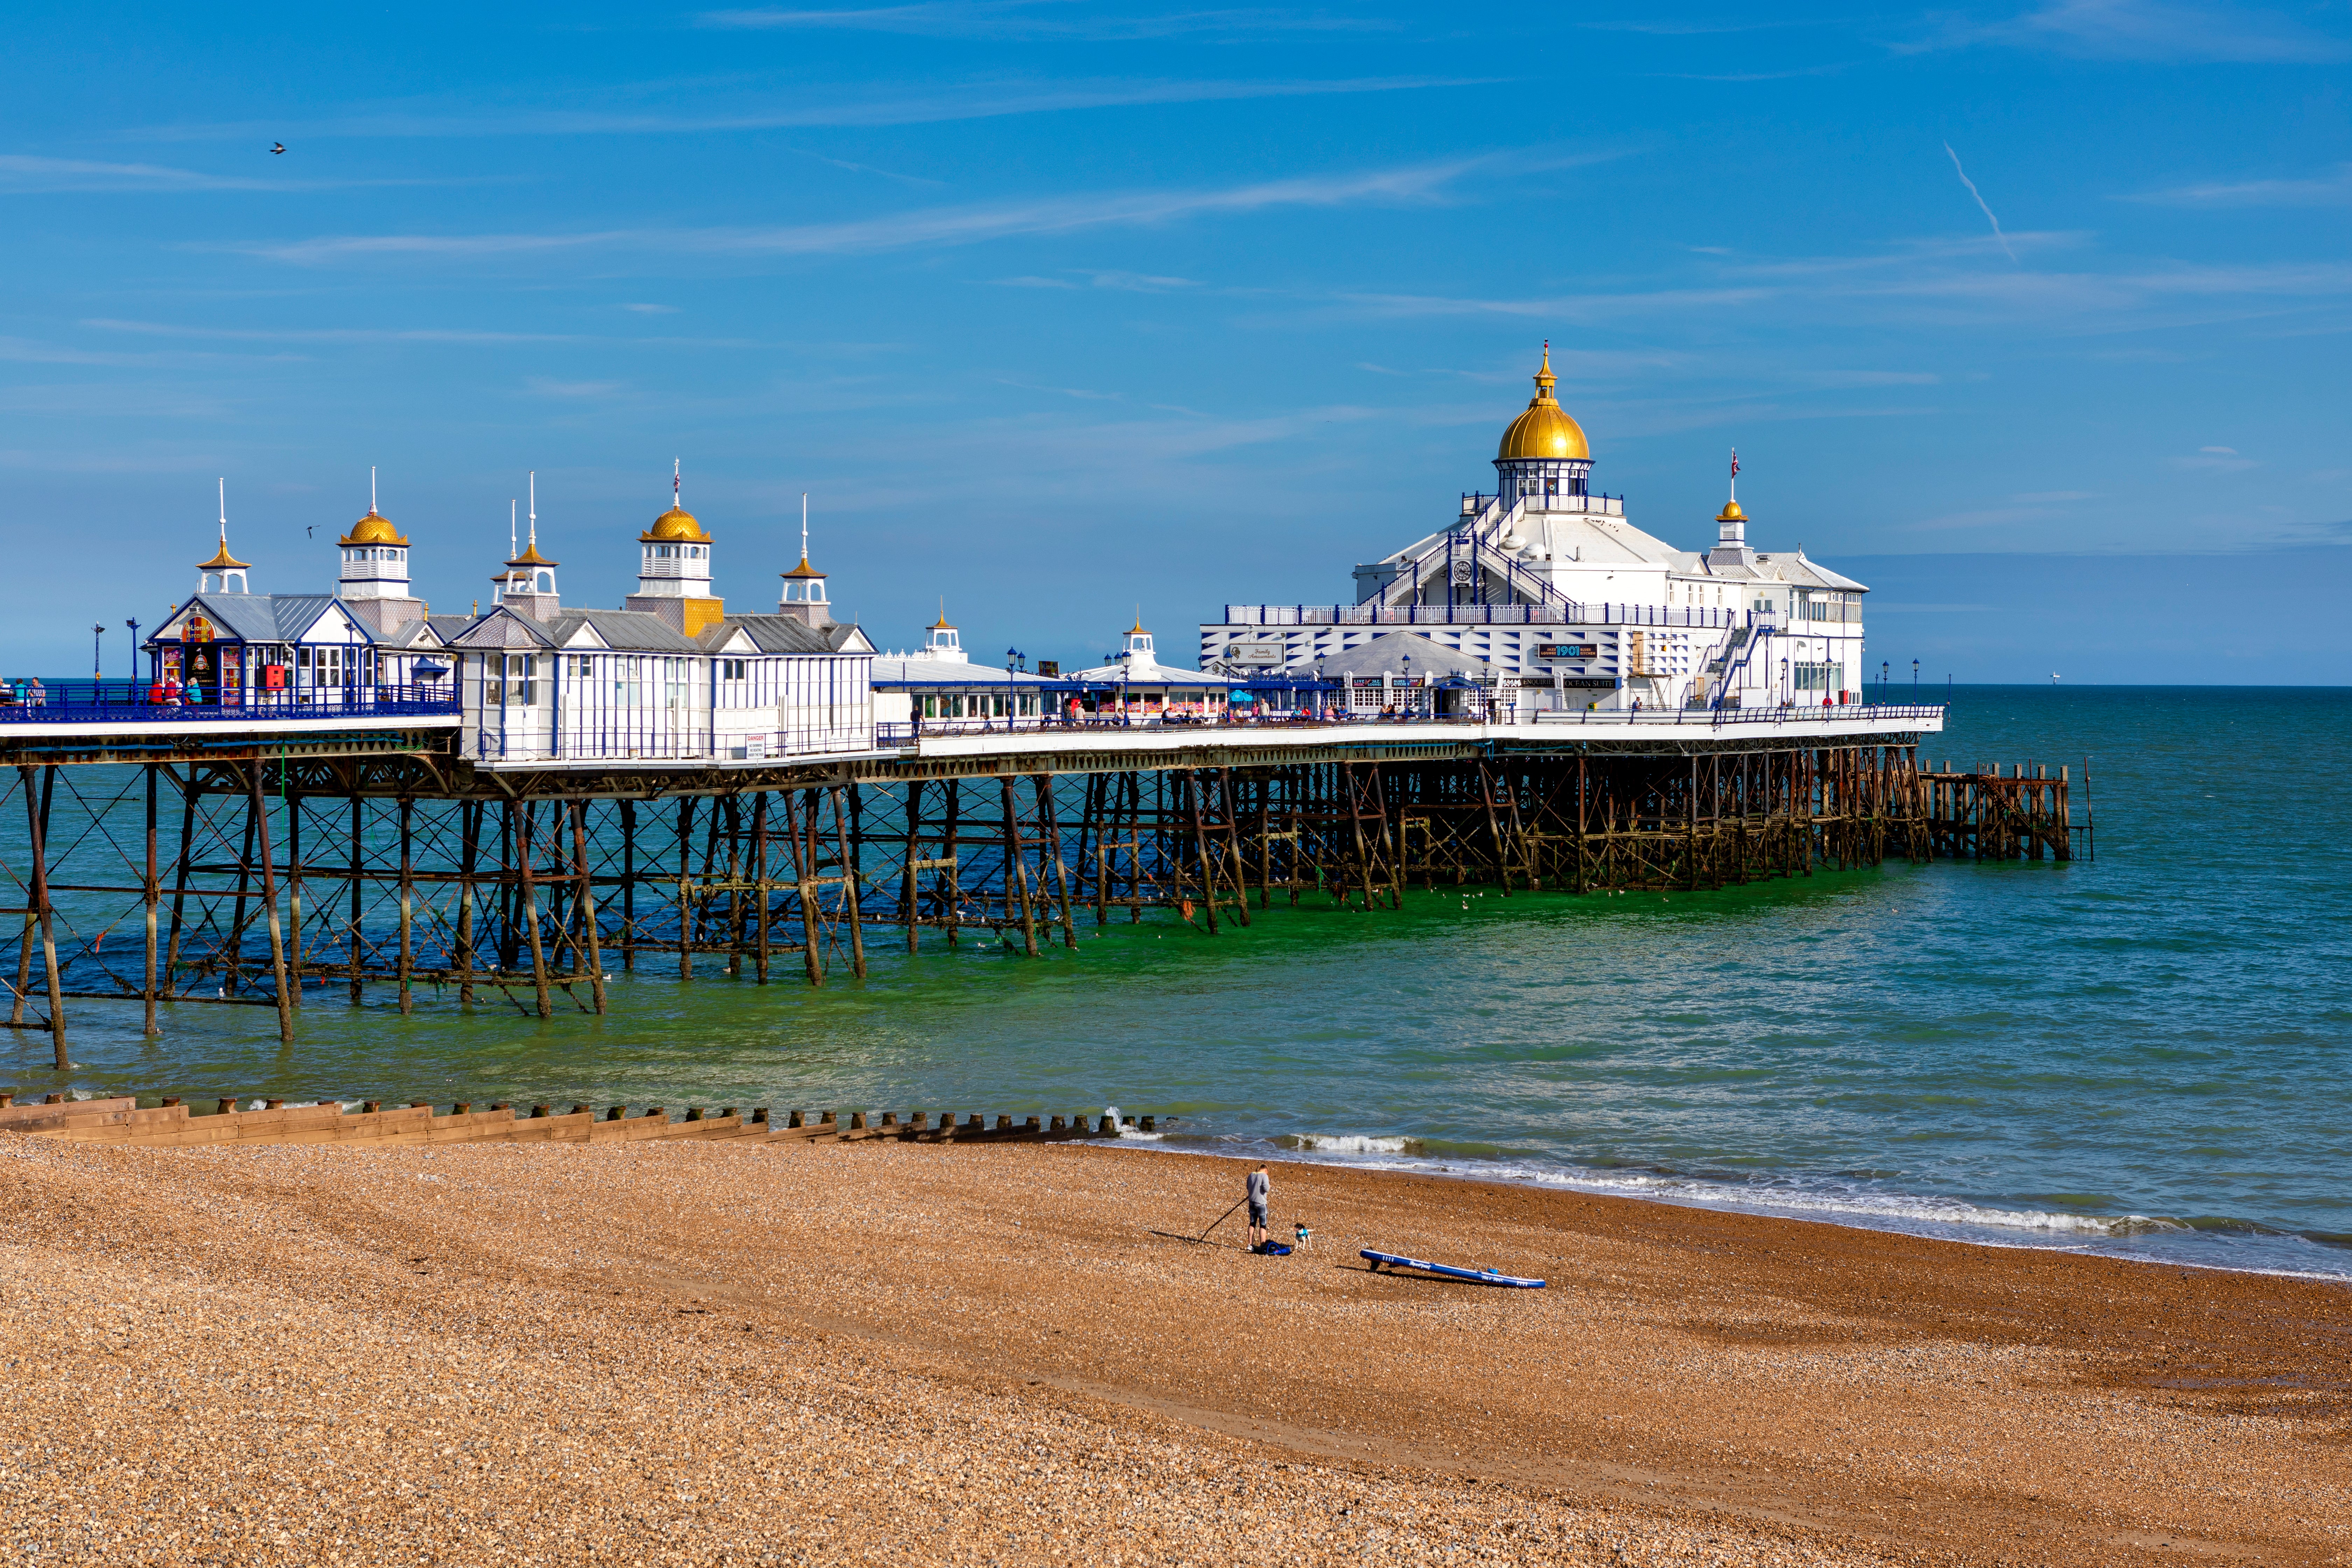 Eastbourne is a quintessential British seaside town